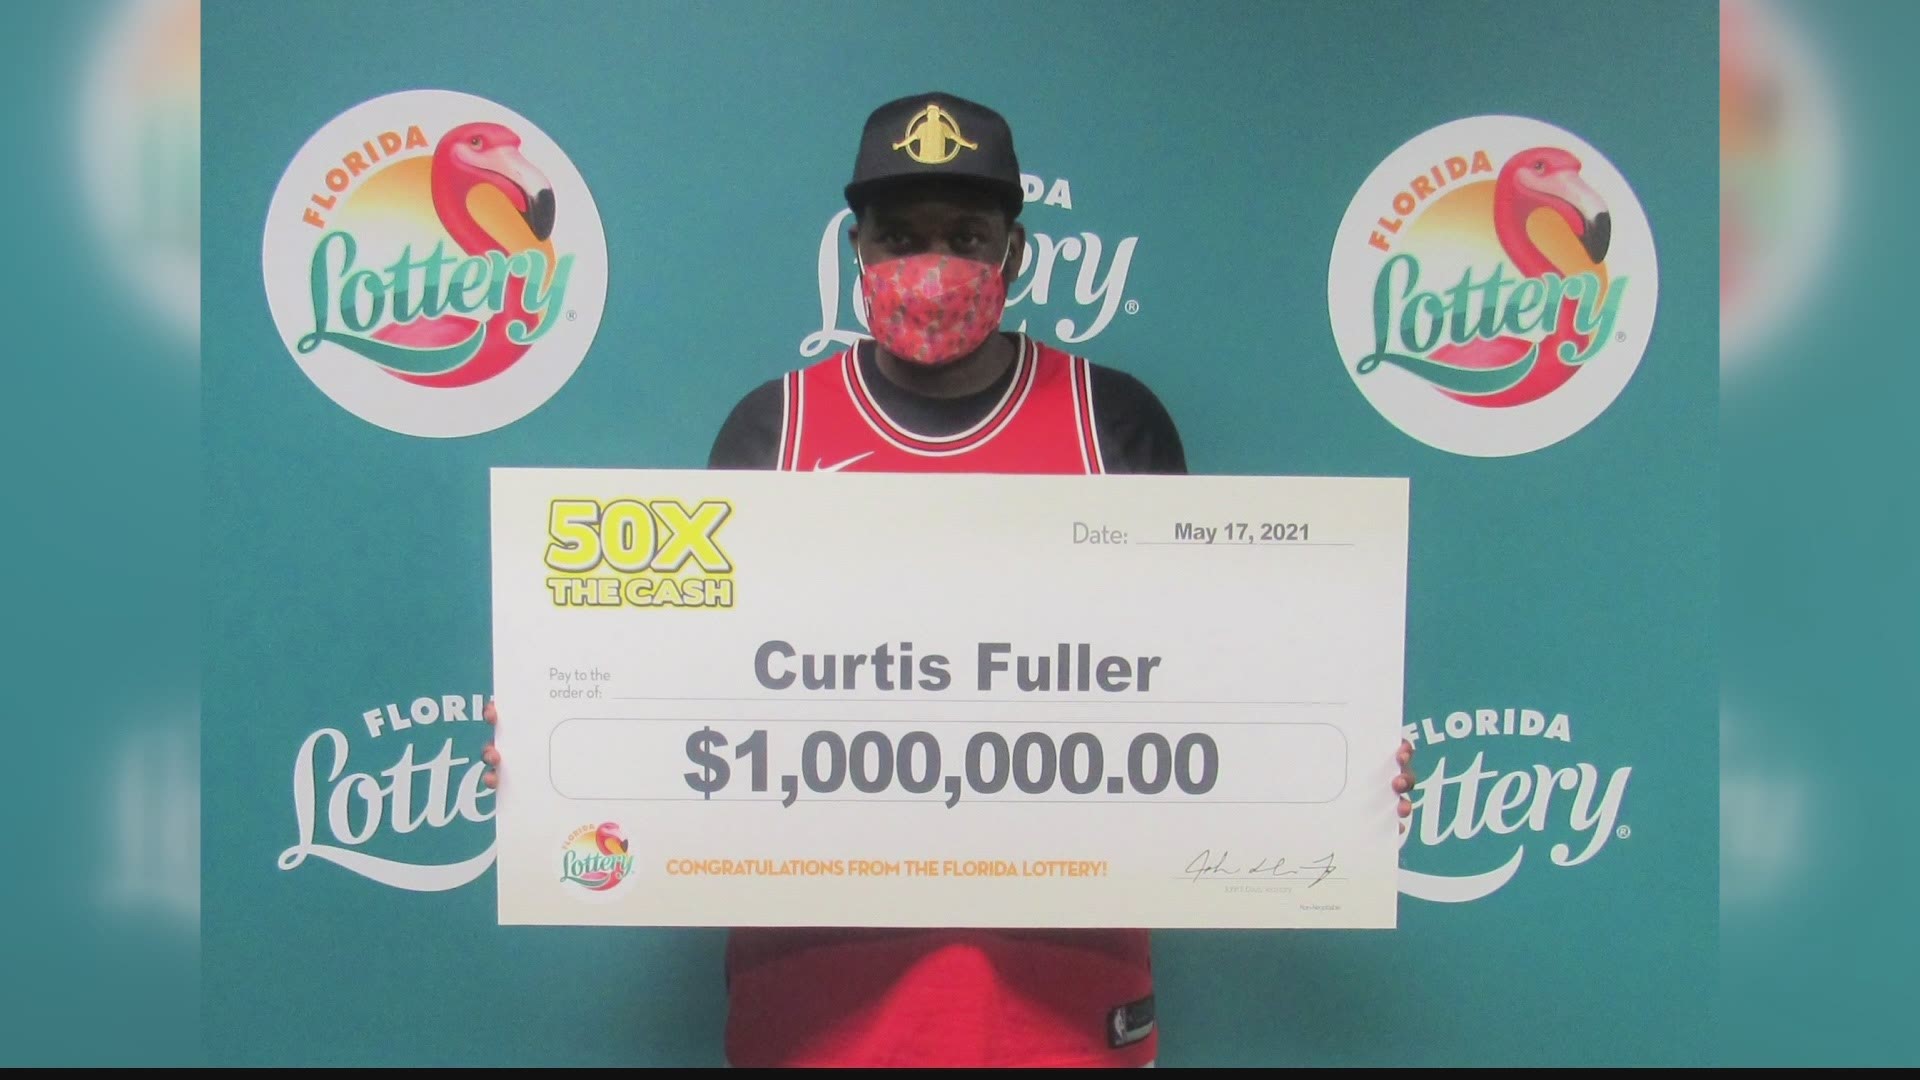 Florida lottery winner Curtis Fuller of Jacksonville won a million bucks on a 50 times the cash scratch off game.